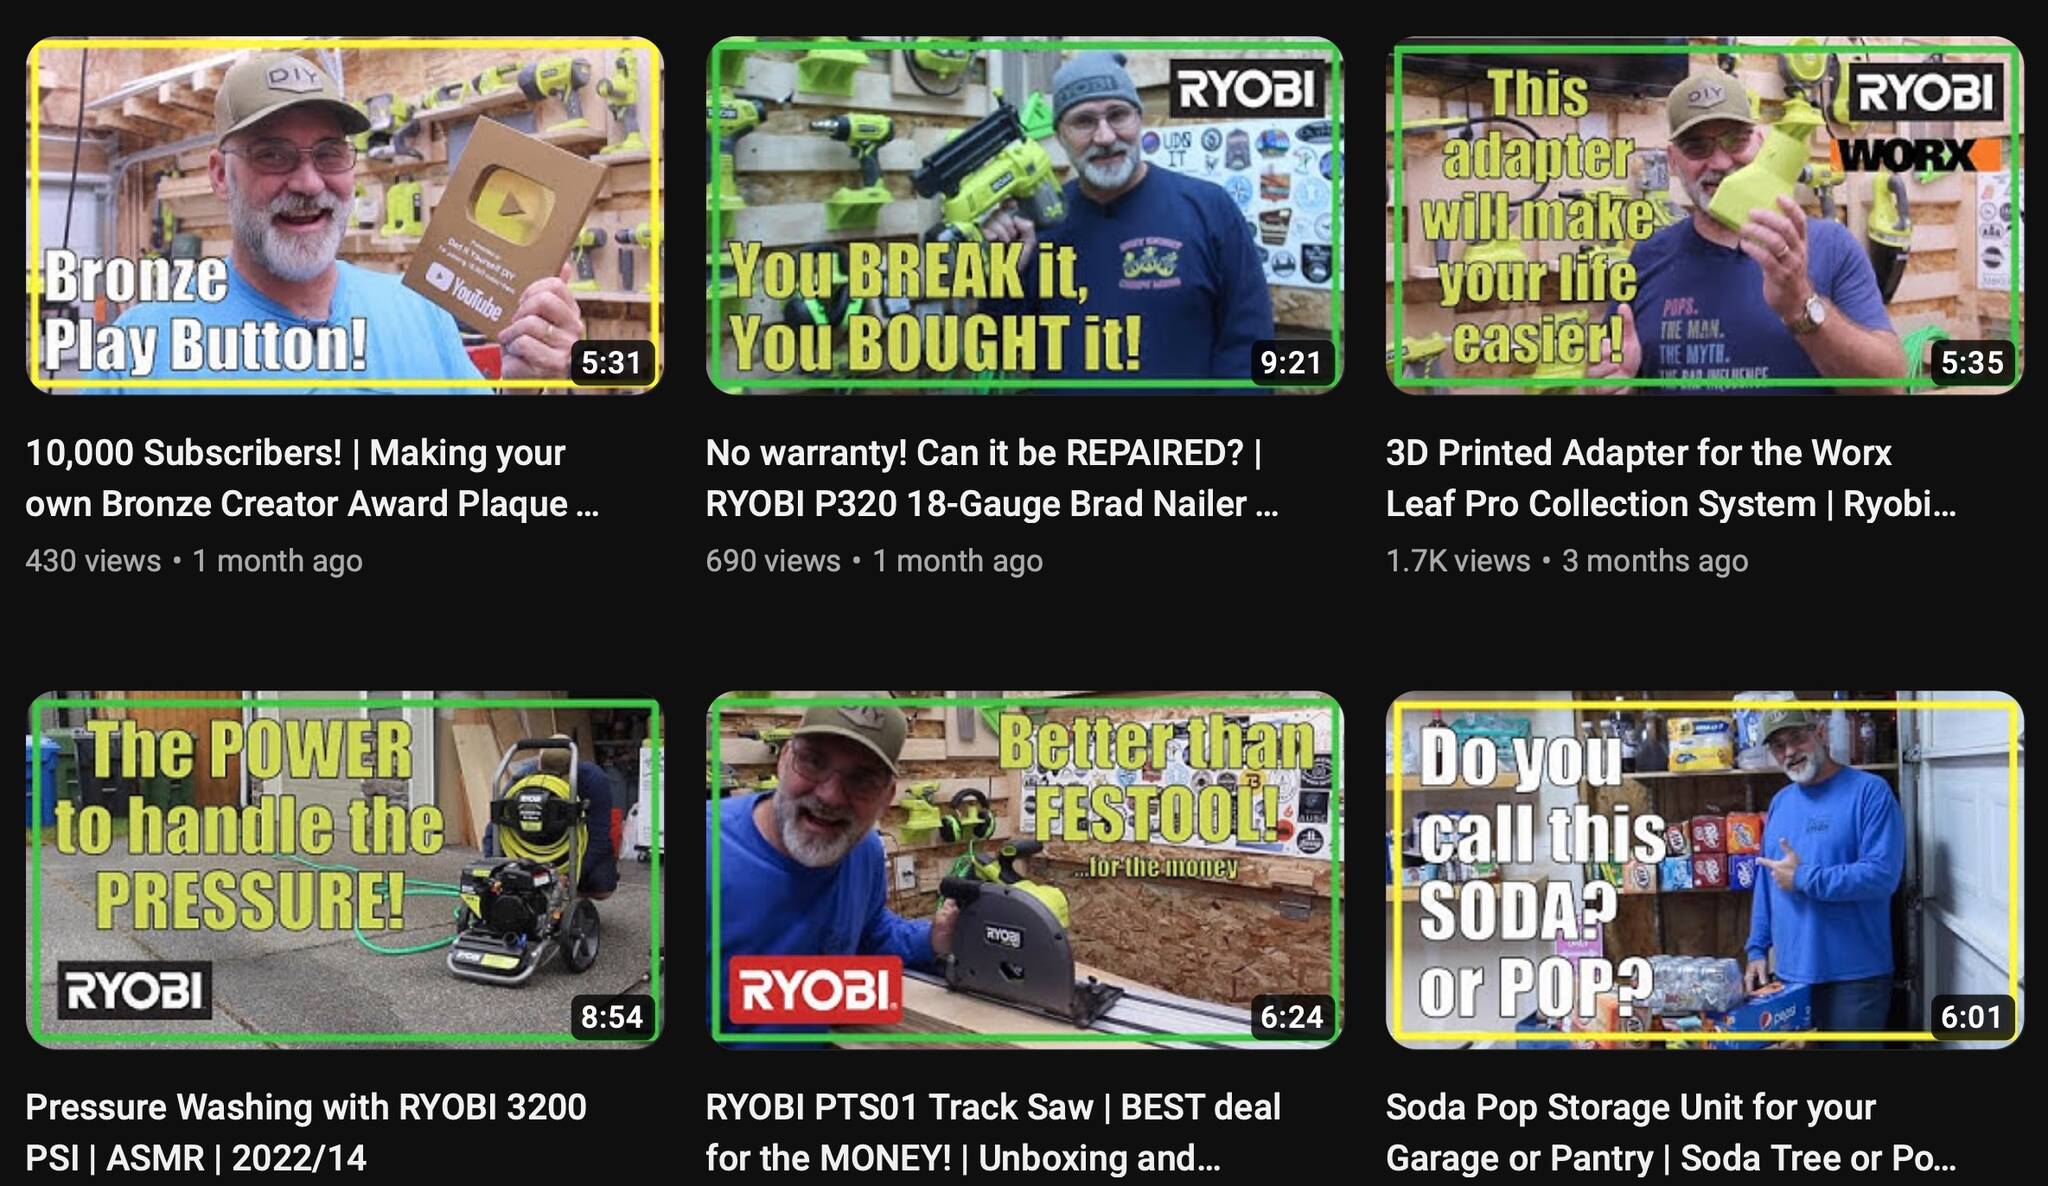 Scott Oram’s YouTube channel Dad it Yourself DIY now has 11,000 subscribers.